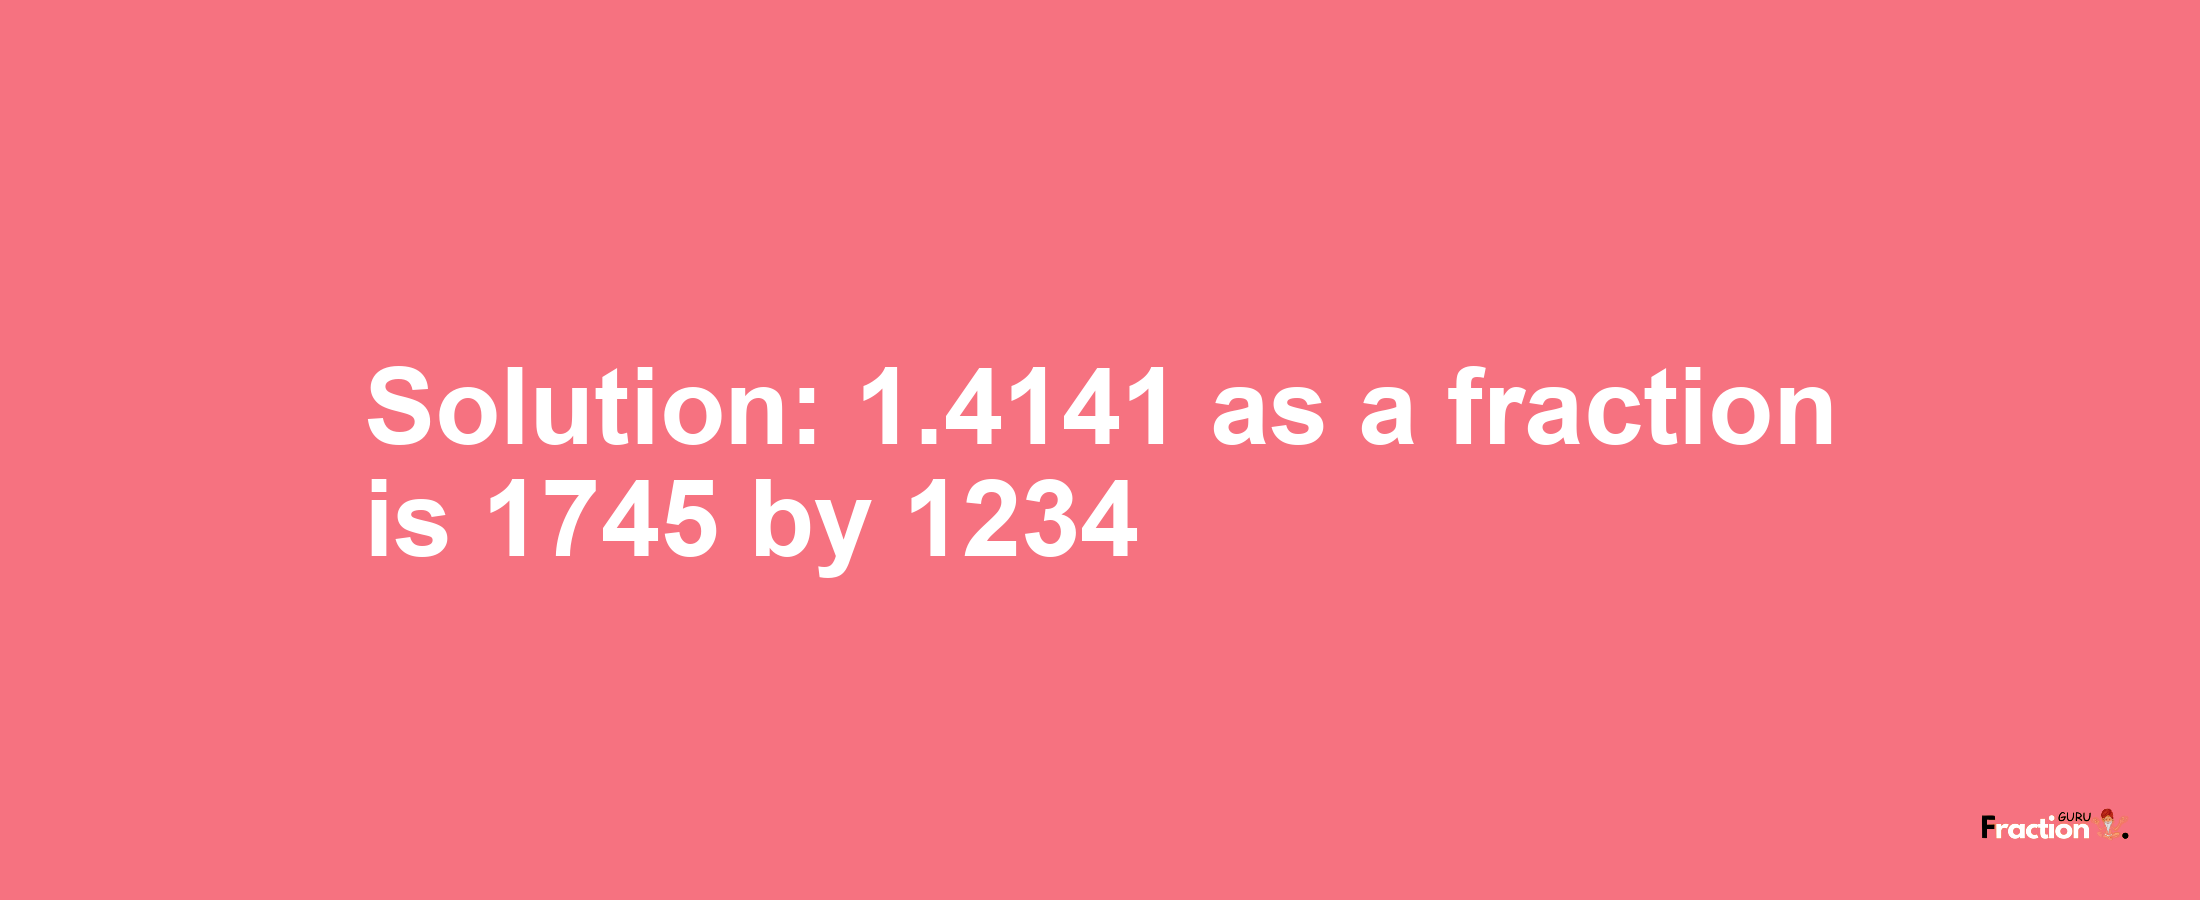 Solution:1.4141 as a fraction is 1745/1234